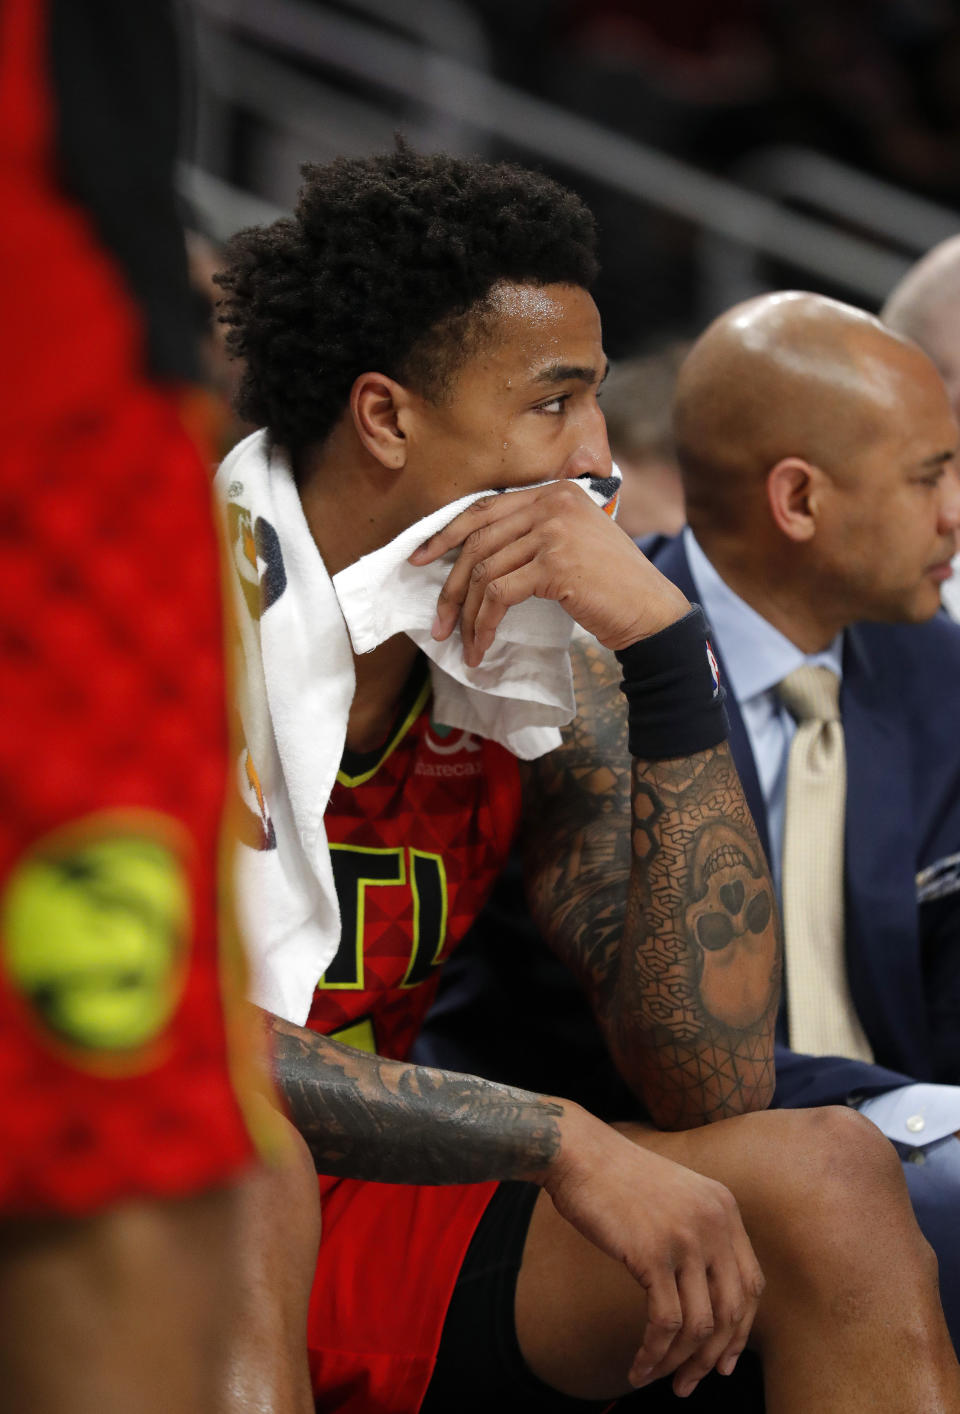 Atlanta Hawks forward John Collins sits on the bench at the end of the team's 106-91 loss to the New York Knicks in an NBA basketball game Thursday, Feb. 14, 2019, in Atlanta. (AP Photo/John Bazemore)